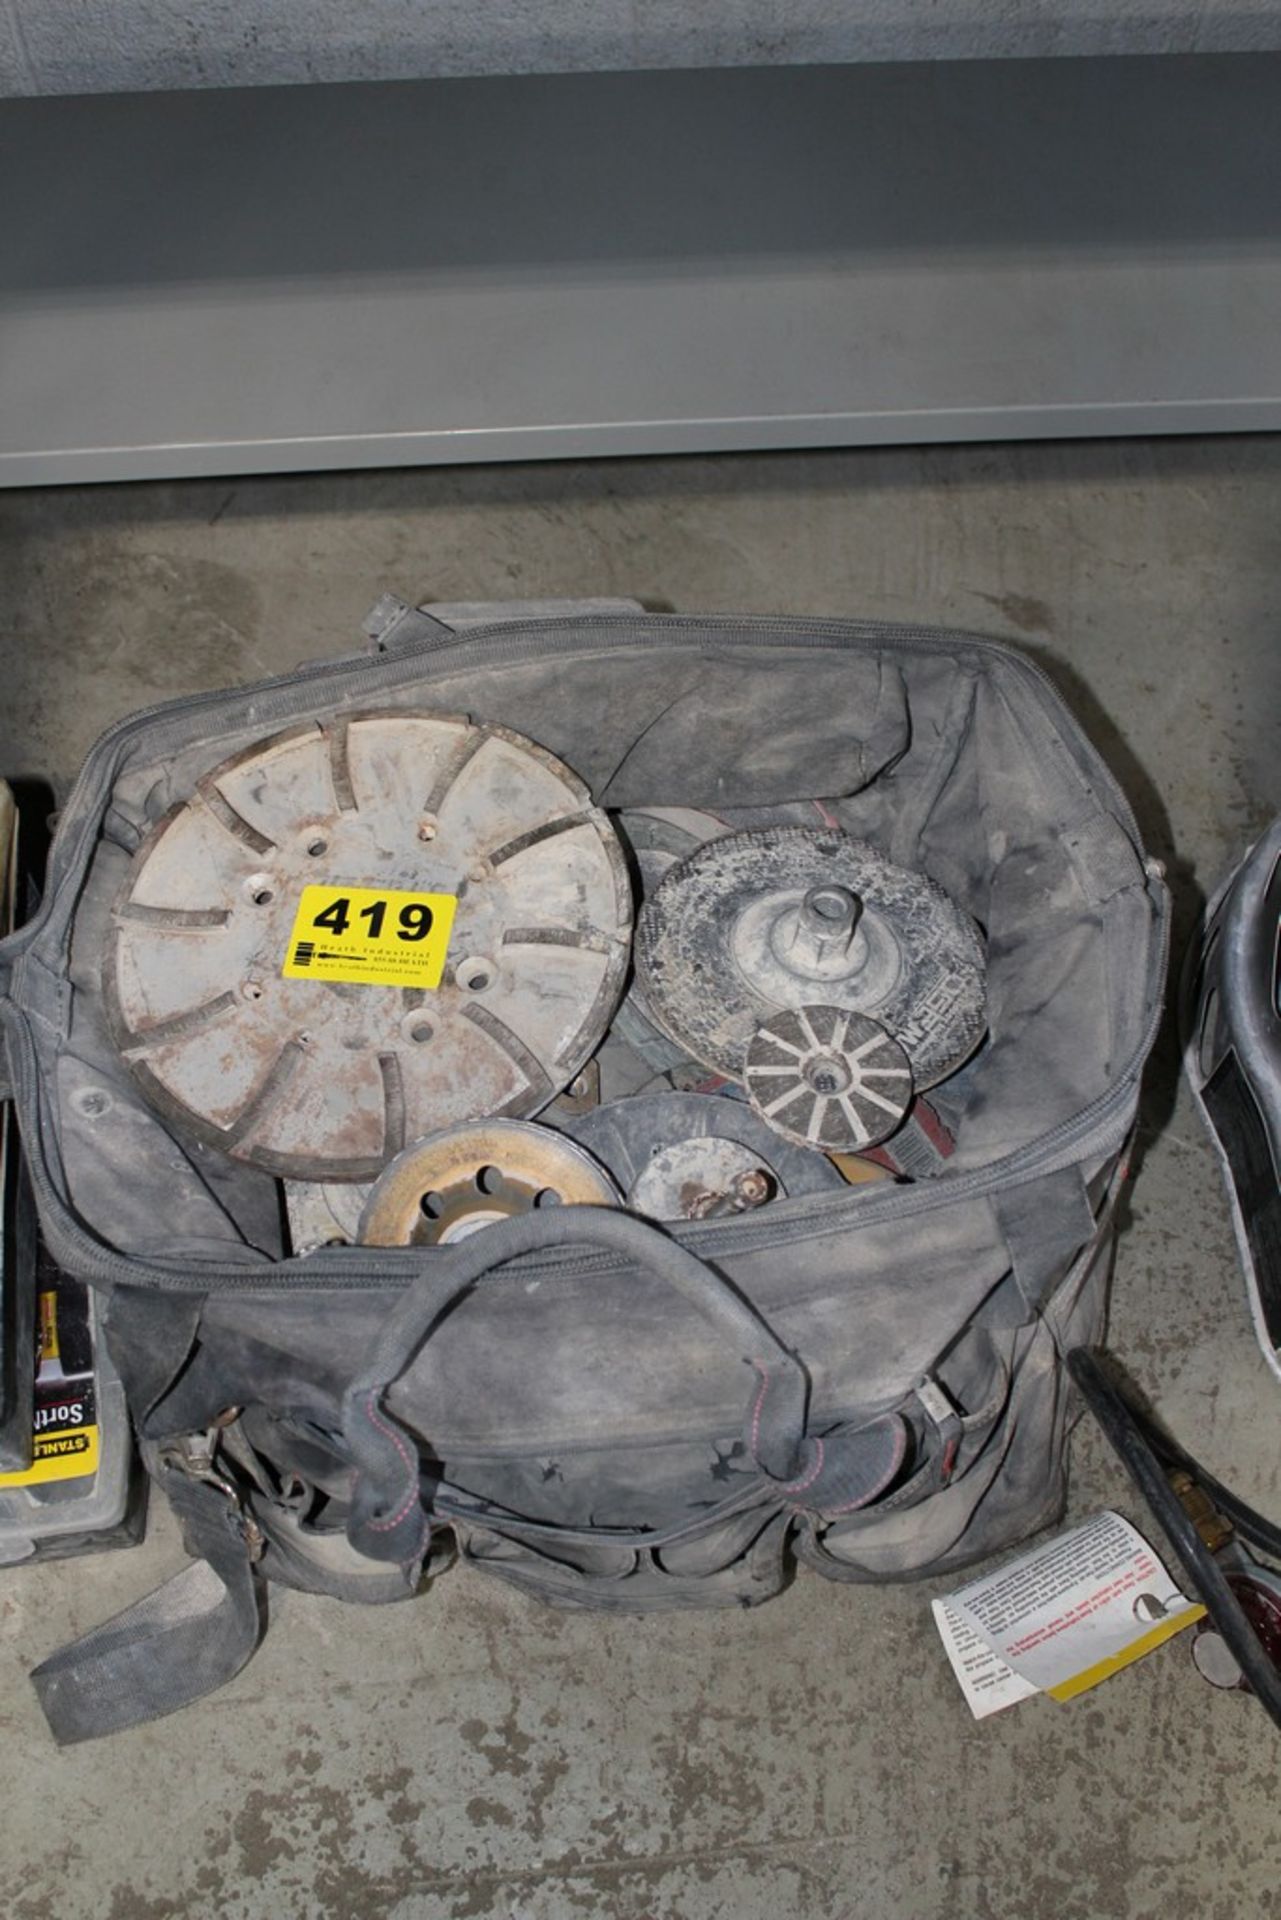 LARGE ASSORTMENT OF GRINDING WHEELS IN TOOL BAG